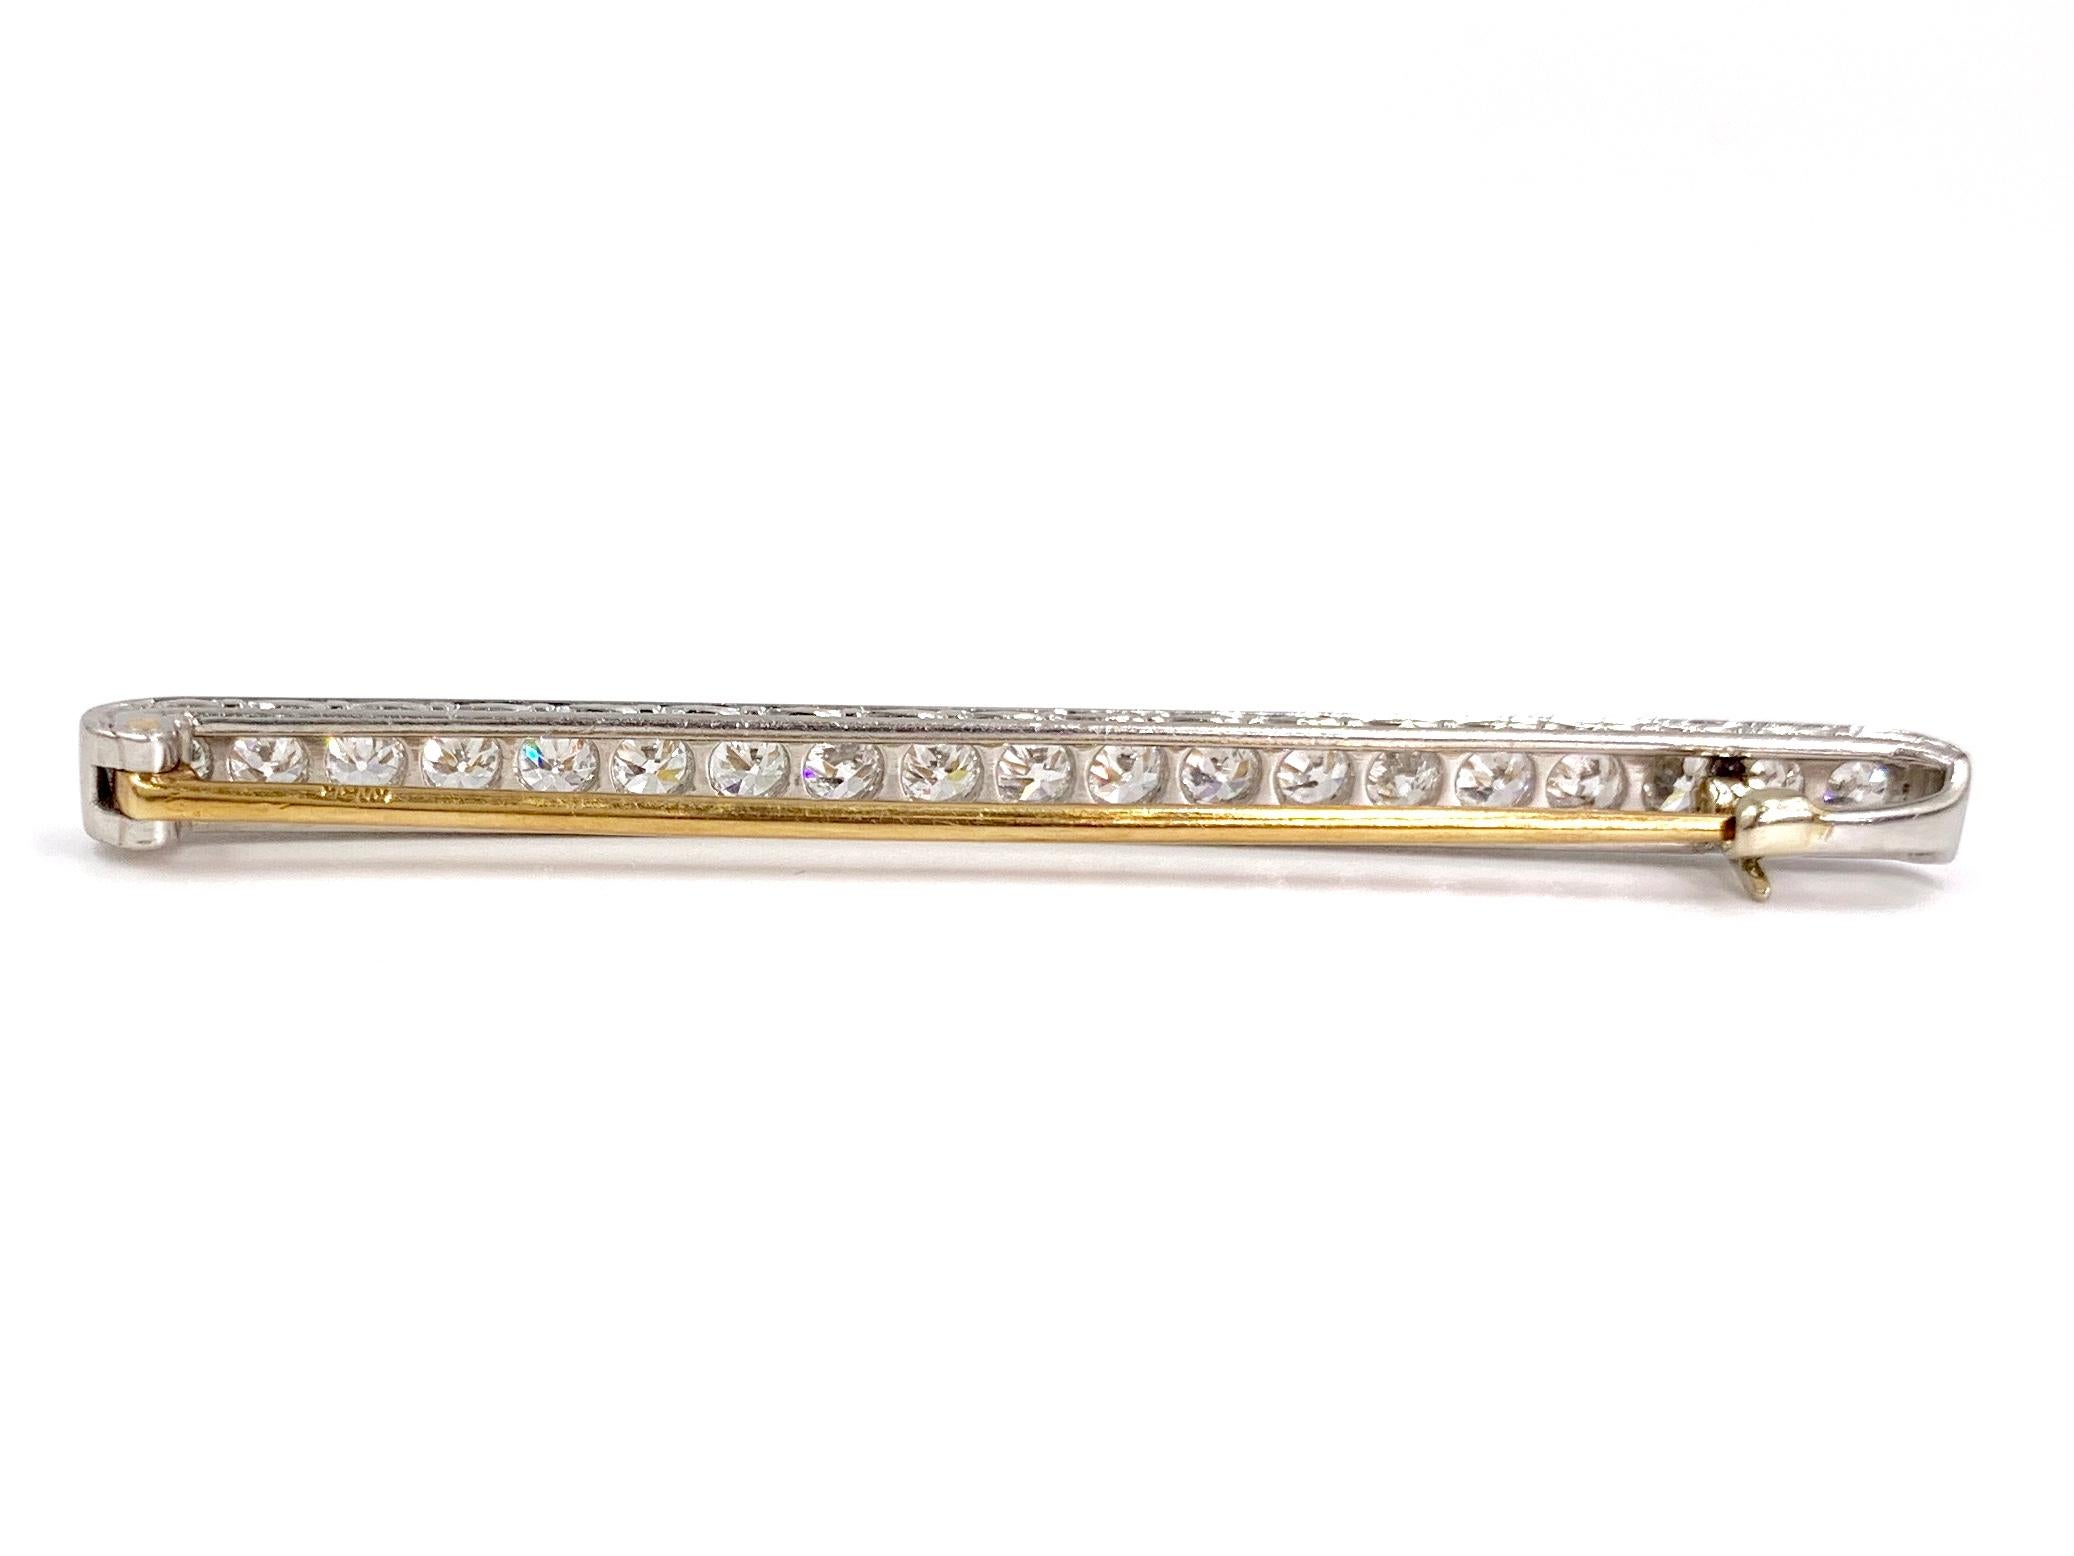 A beautiful and timeless platinum and 18 karat yellow gold Art Deco diamond bar brooch featuring 19 Old European cut diamonds at approximately 2.28 carats total weight. Diamonds have a generous amount of sparkle with grading of approximately G-H